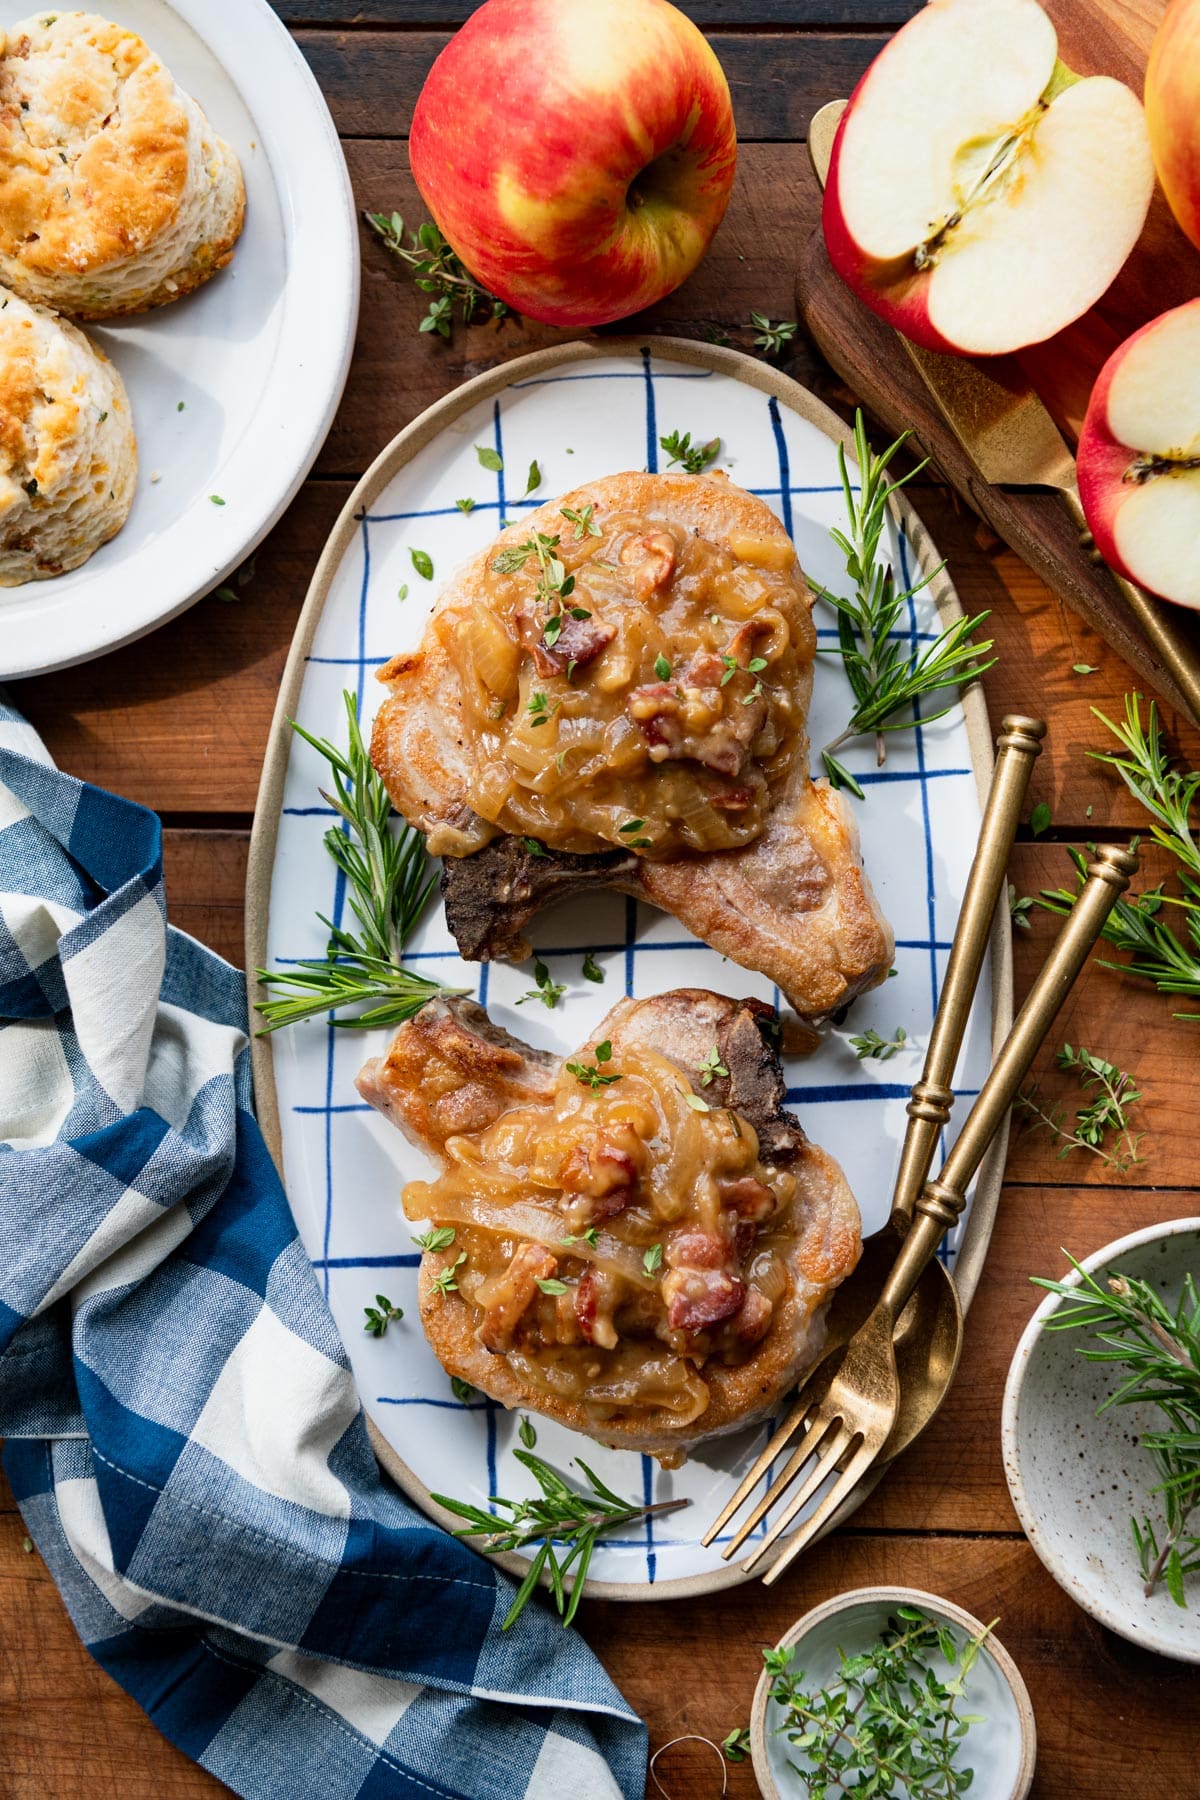 Crock Pot Southern smothered pork chops on a serving tray with a side of biscuits and apples.